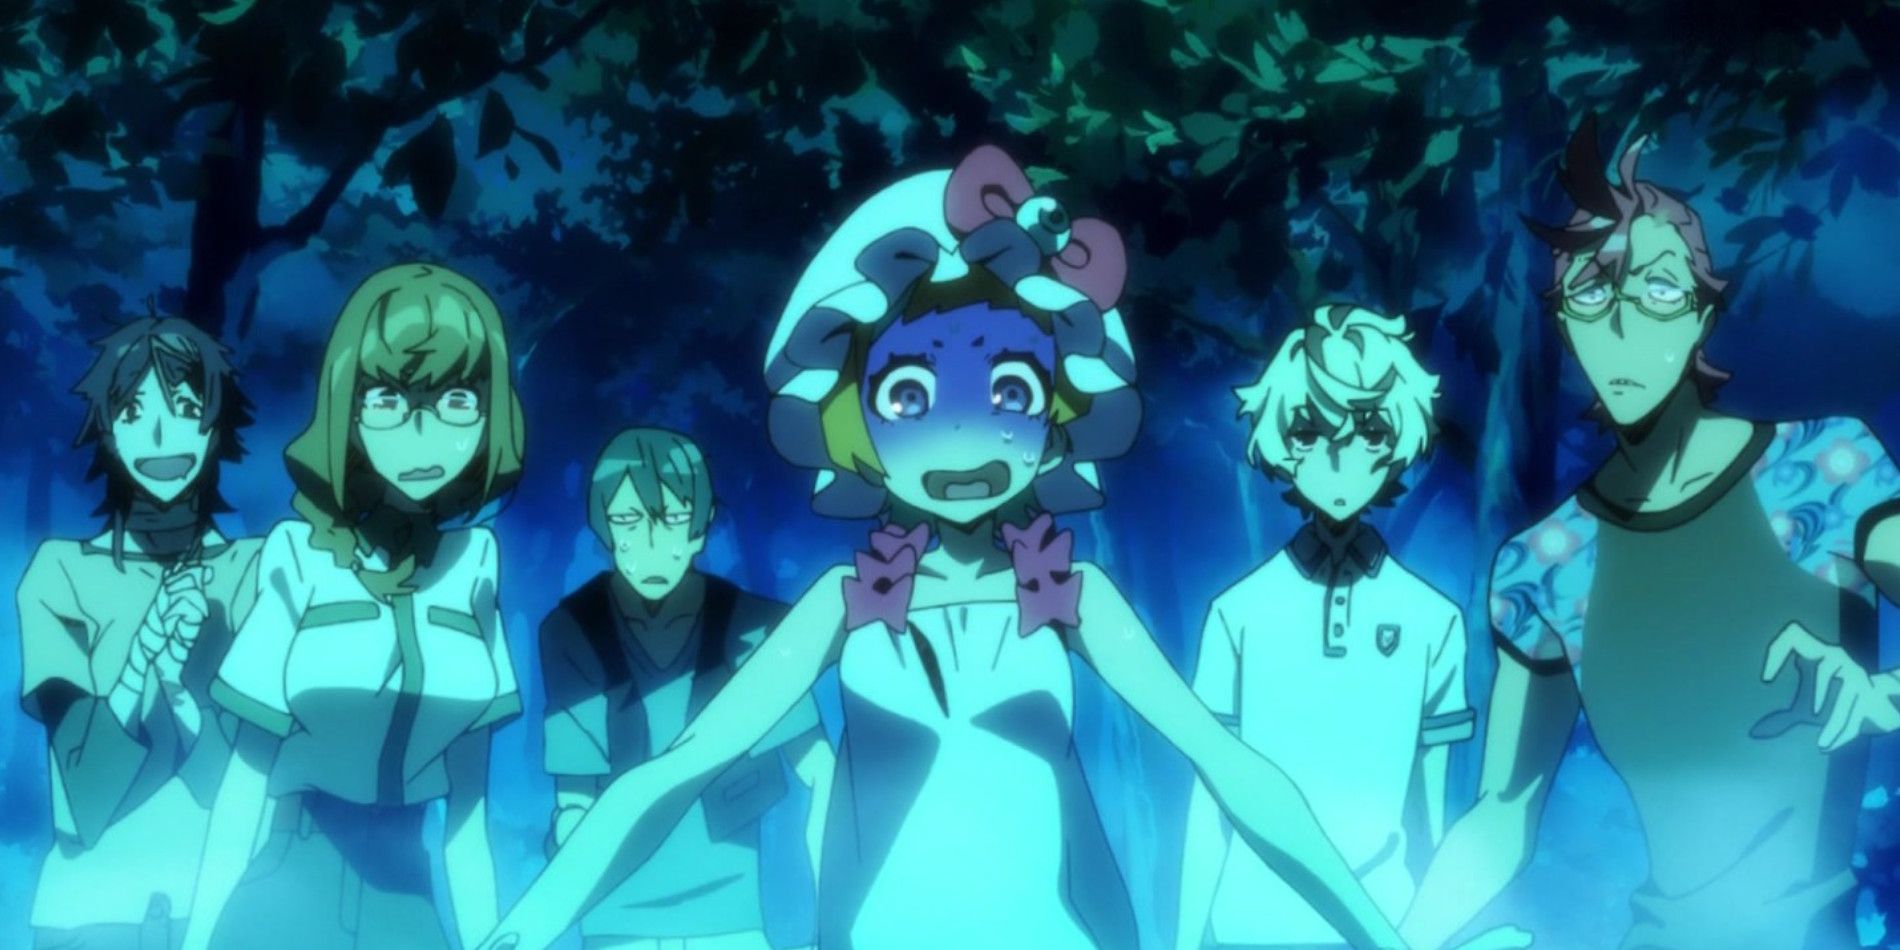 Magical powers are accepted in Trigger's Kiznaiver